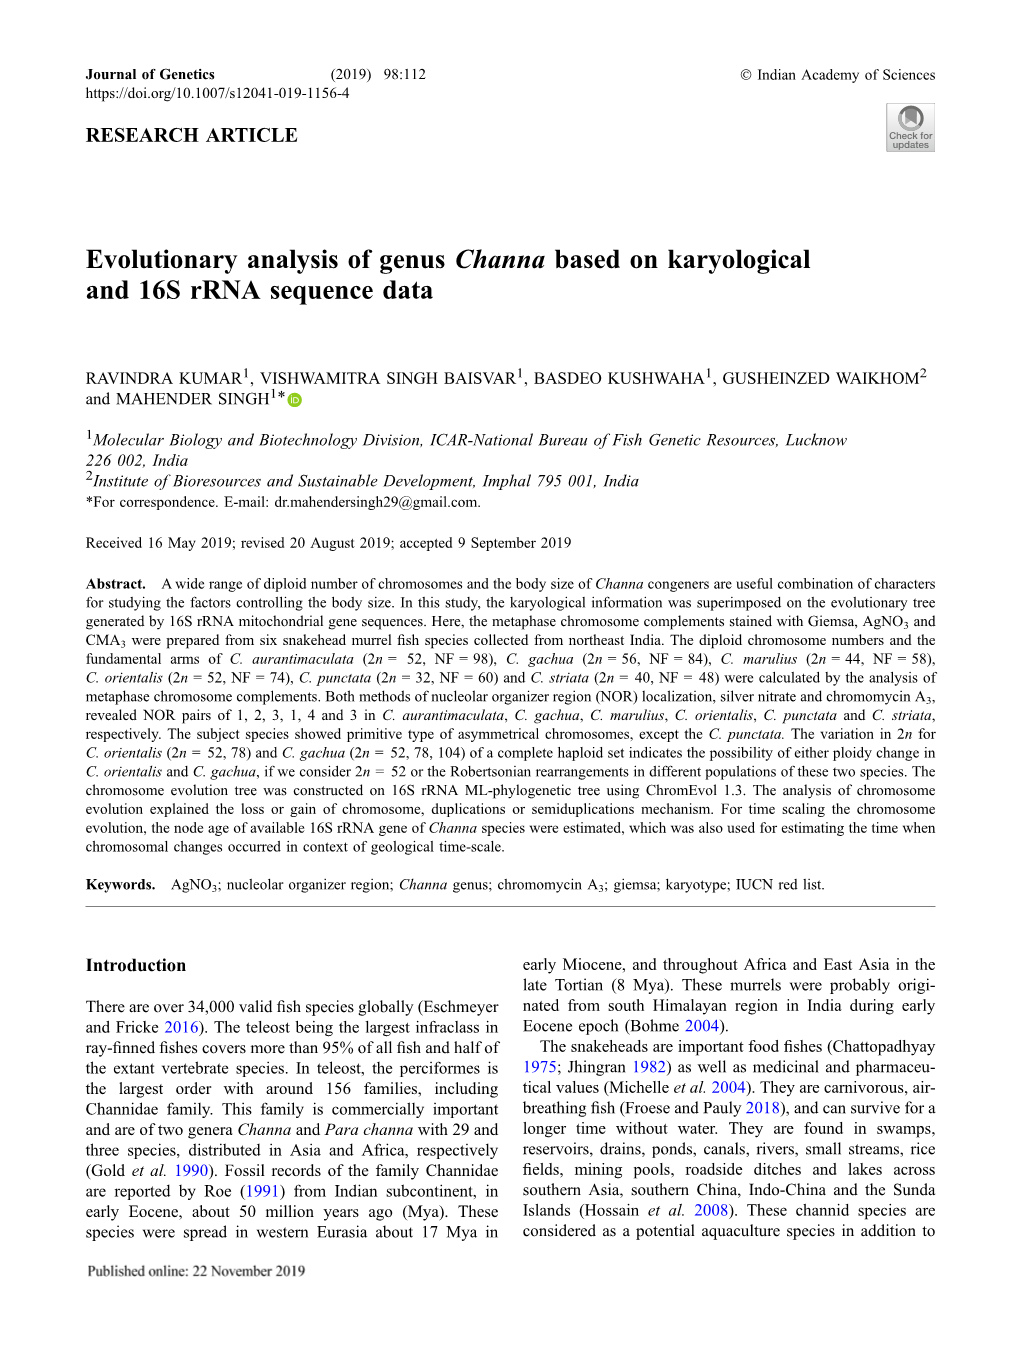 Evolutionary Analysis of Genus Channa Based on Karyological and 16S Rrna Sequence Data